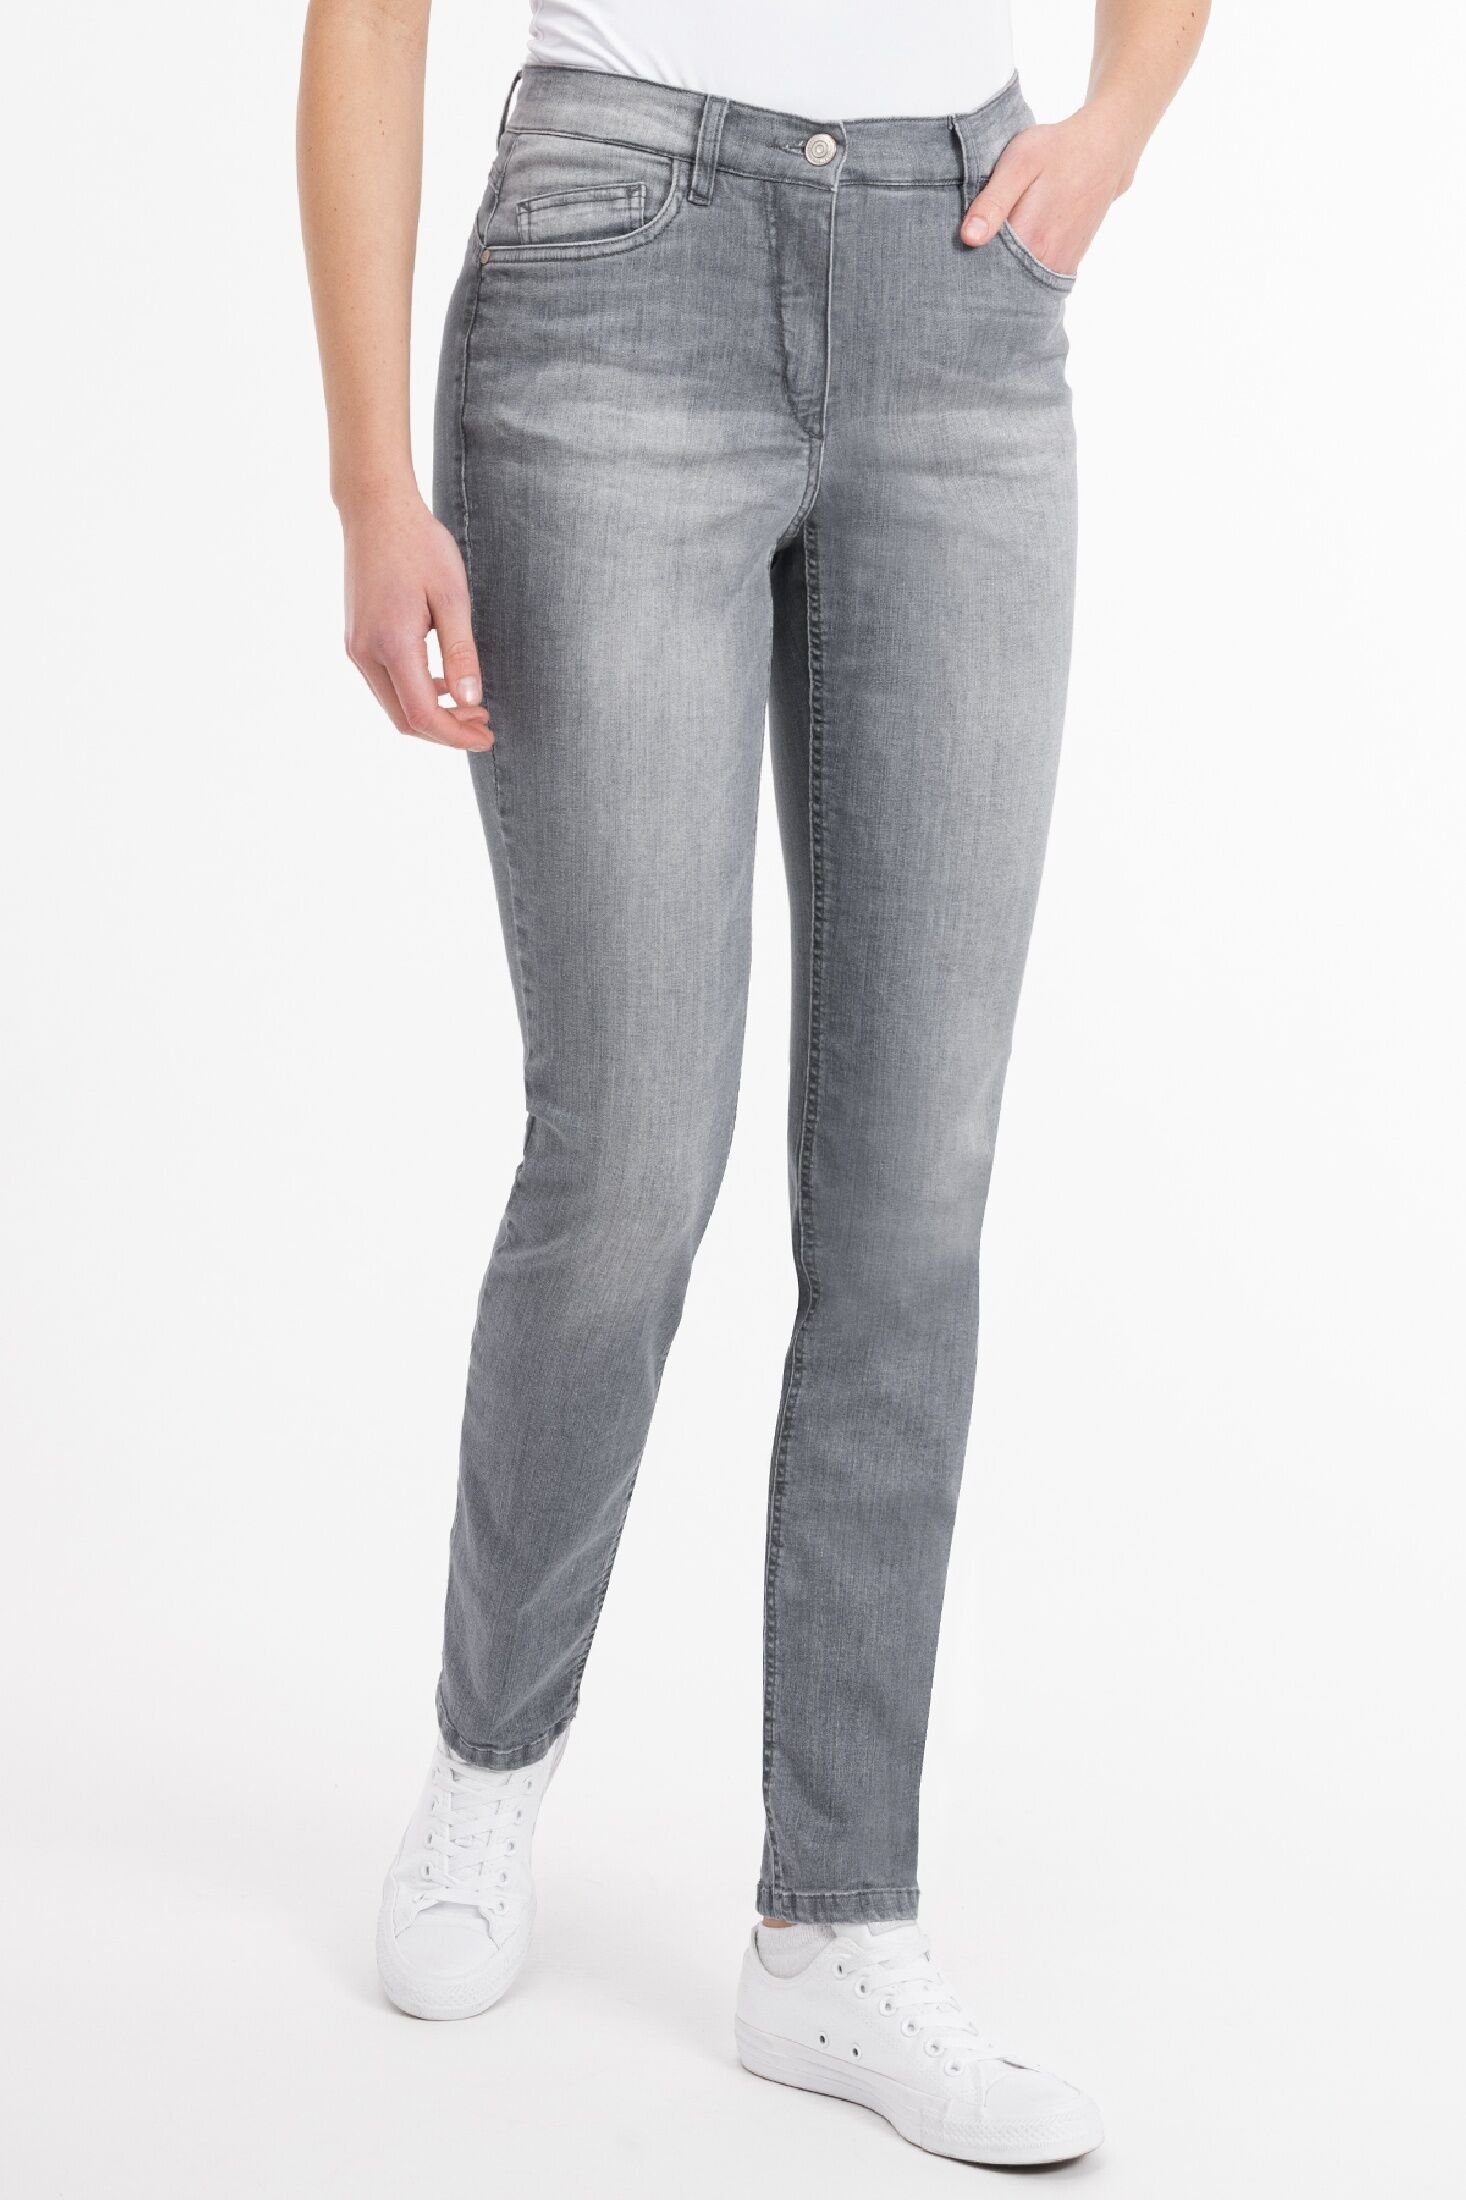 Recover Pants Slim-fit-Jeans ADRIAN GREY